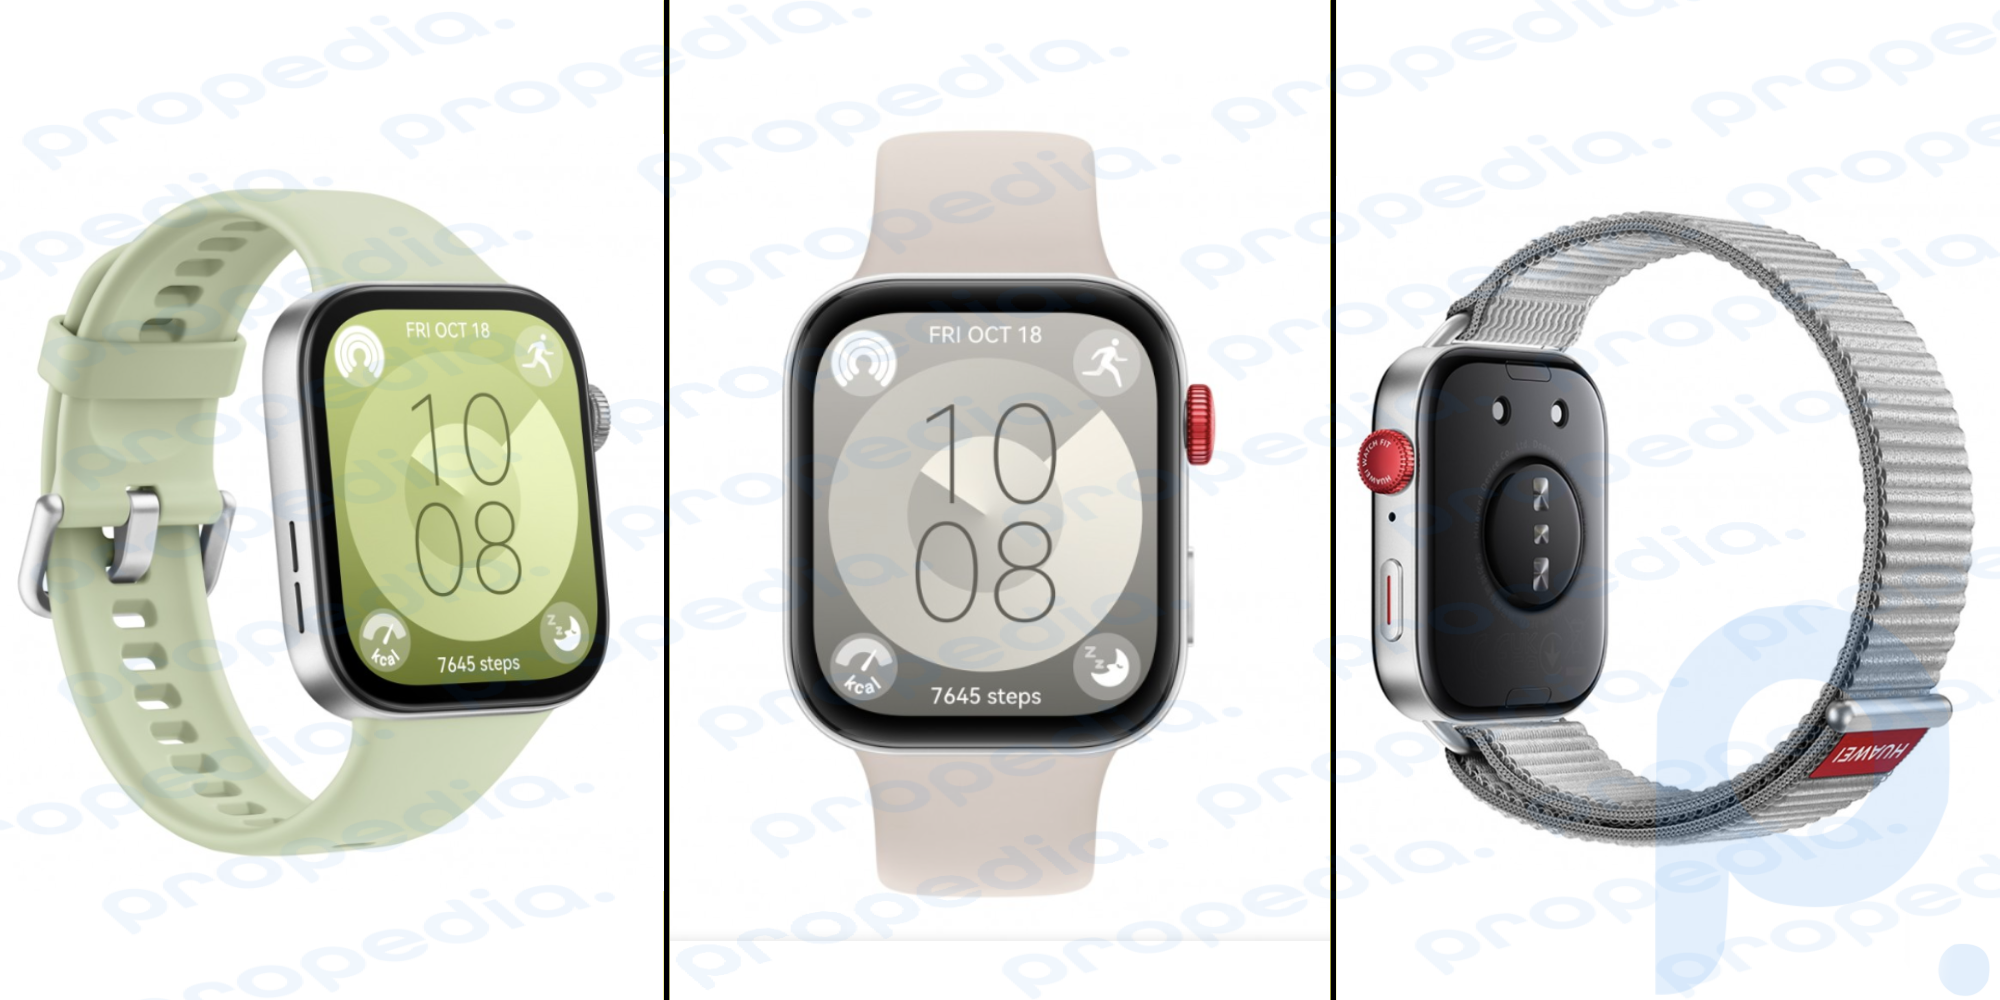 Huawei has released a budget watch, Watch Fit 3, similar to the Apple Watch